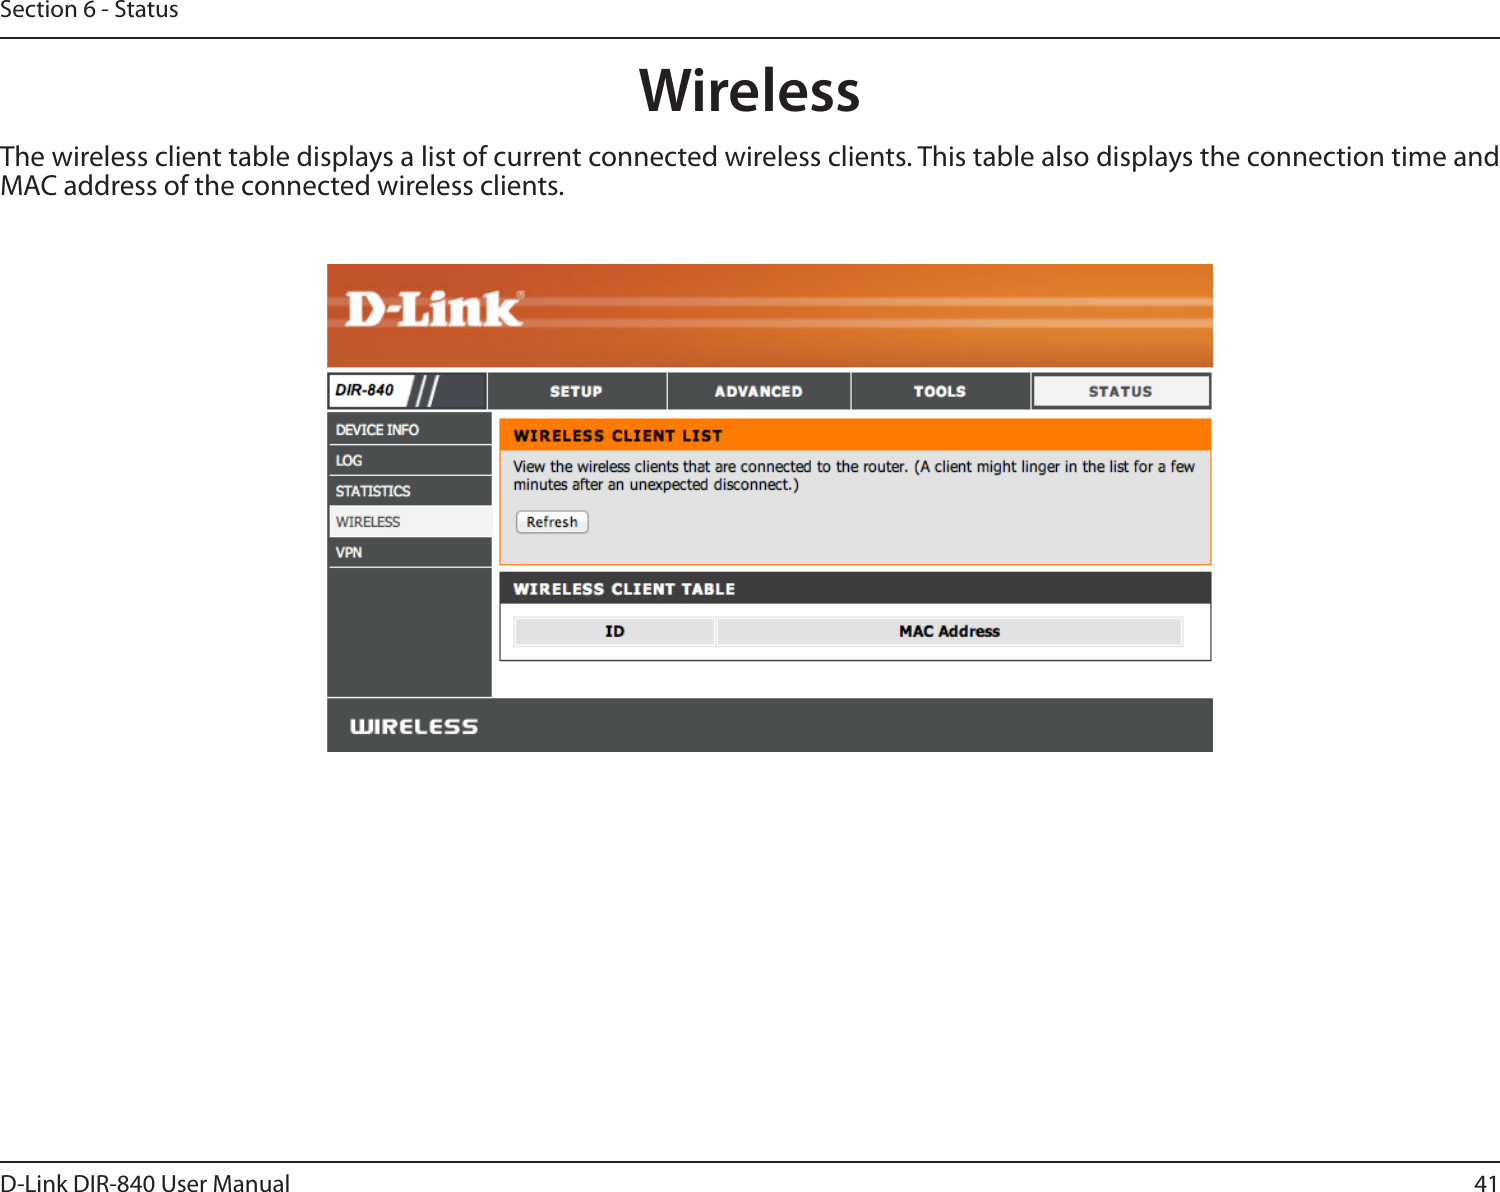 41D-Link DIR-840 User ManualSection 6 - StatusThe wireless client table displays a list of current connected wireless clients. This table also displays the connection time and MAC address of the connected wireless clients.Wireless